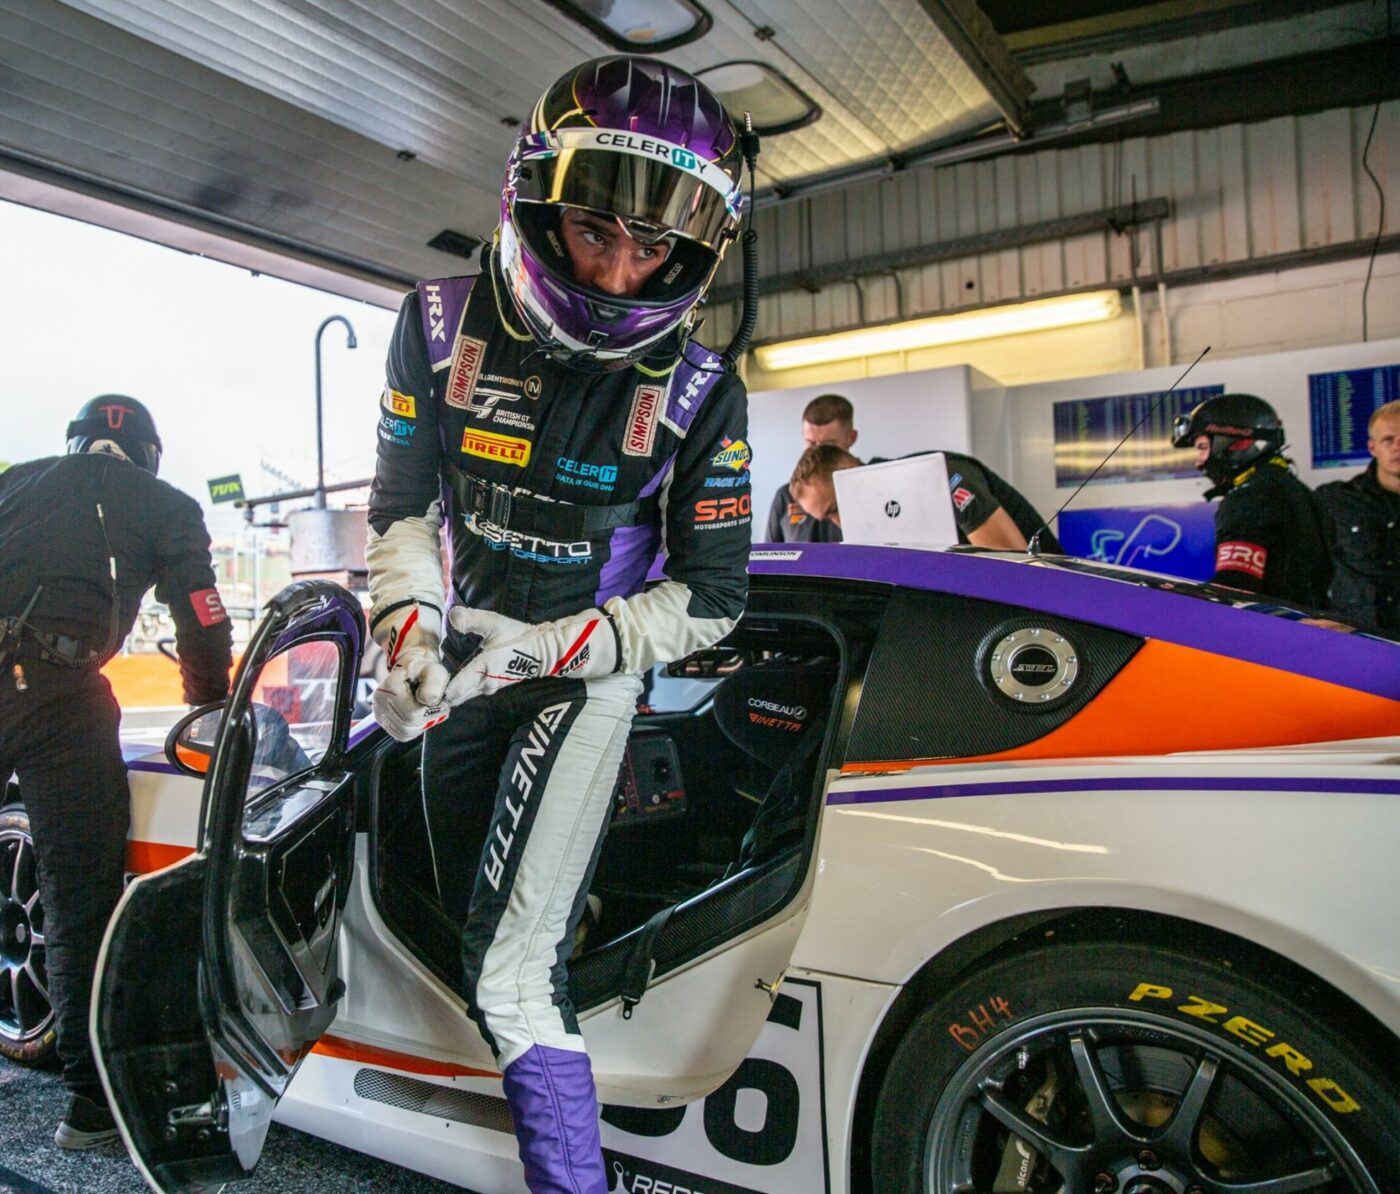 Joe Wheeler Signs With Toro Verde For His Second Season Competing In British GT